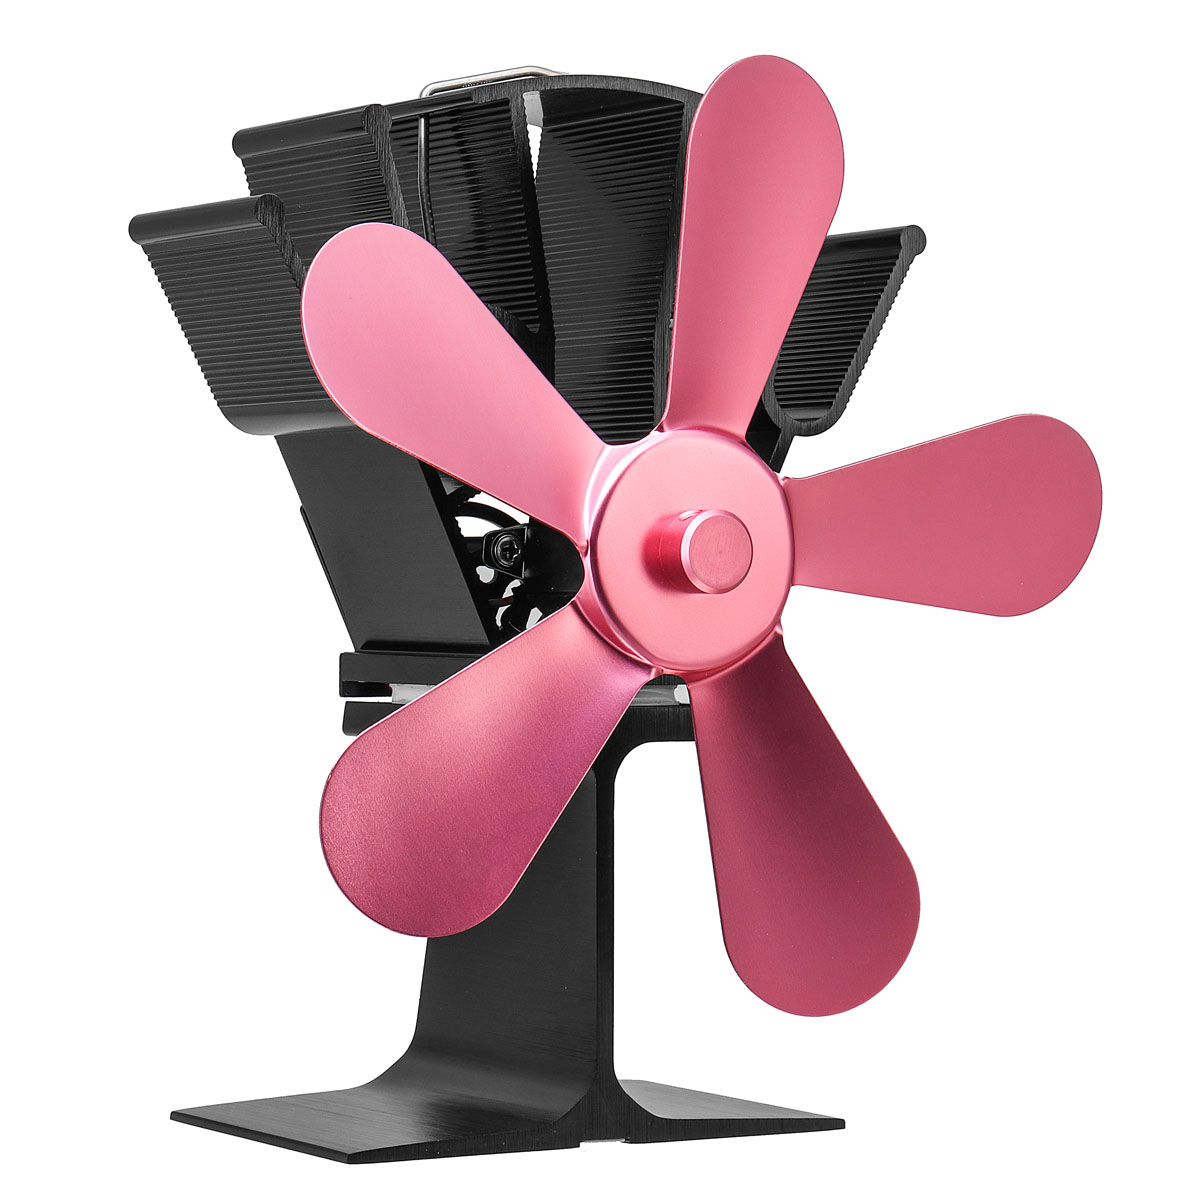 Details About 5 Blades Heat Powered Stove Fan For Wood Burner Fireplace Eco Friendly pertaining to proportions 1200 X 1200